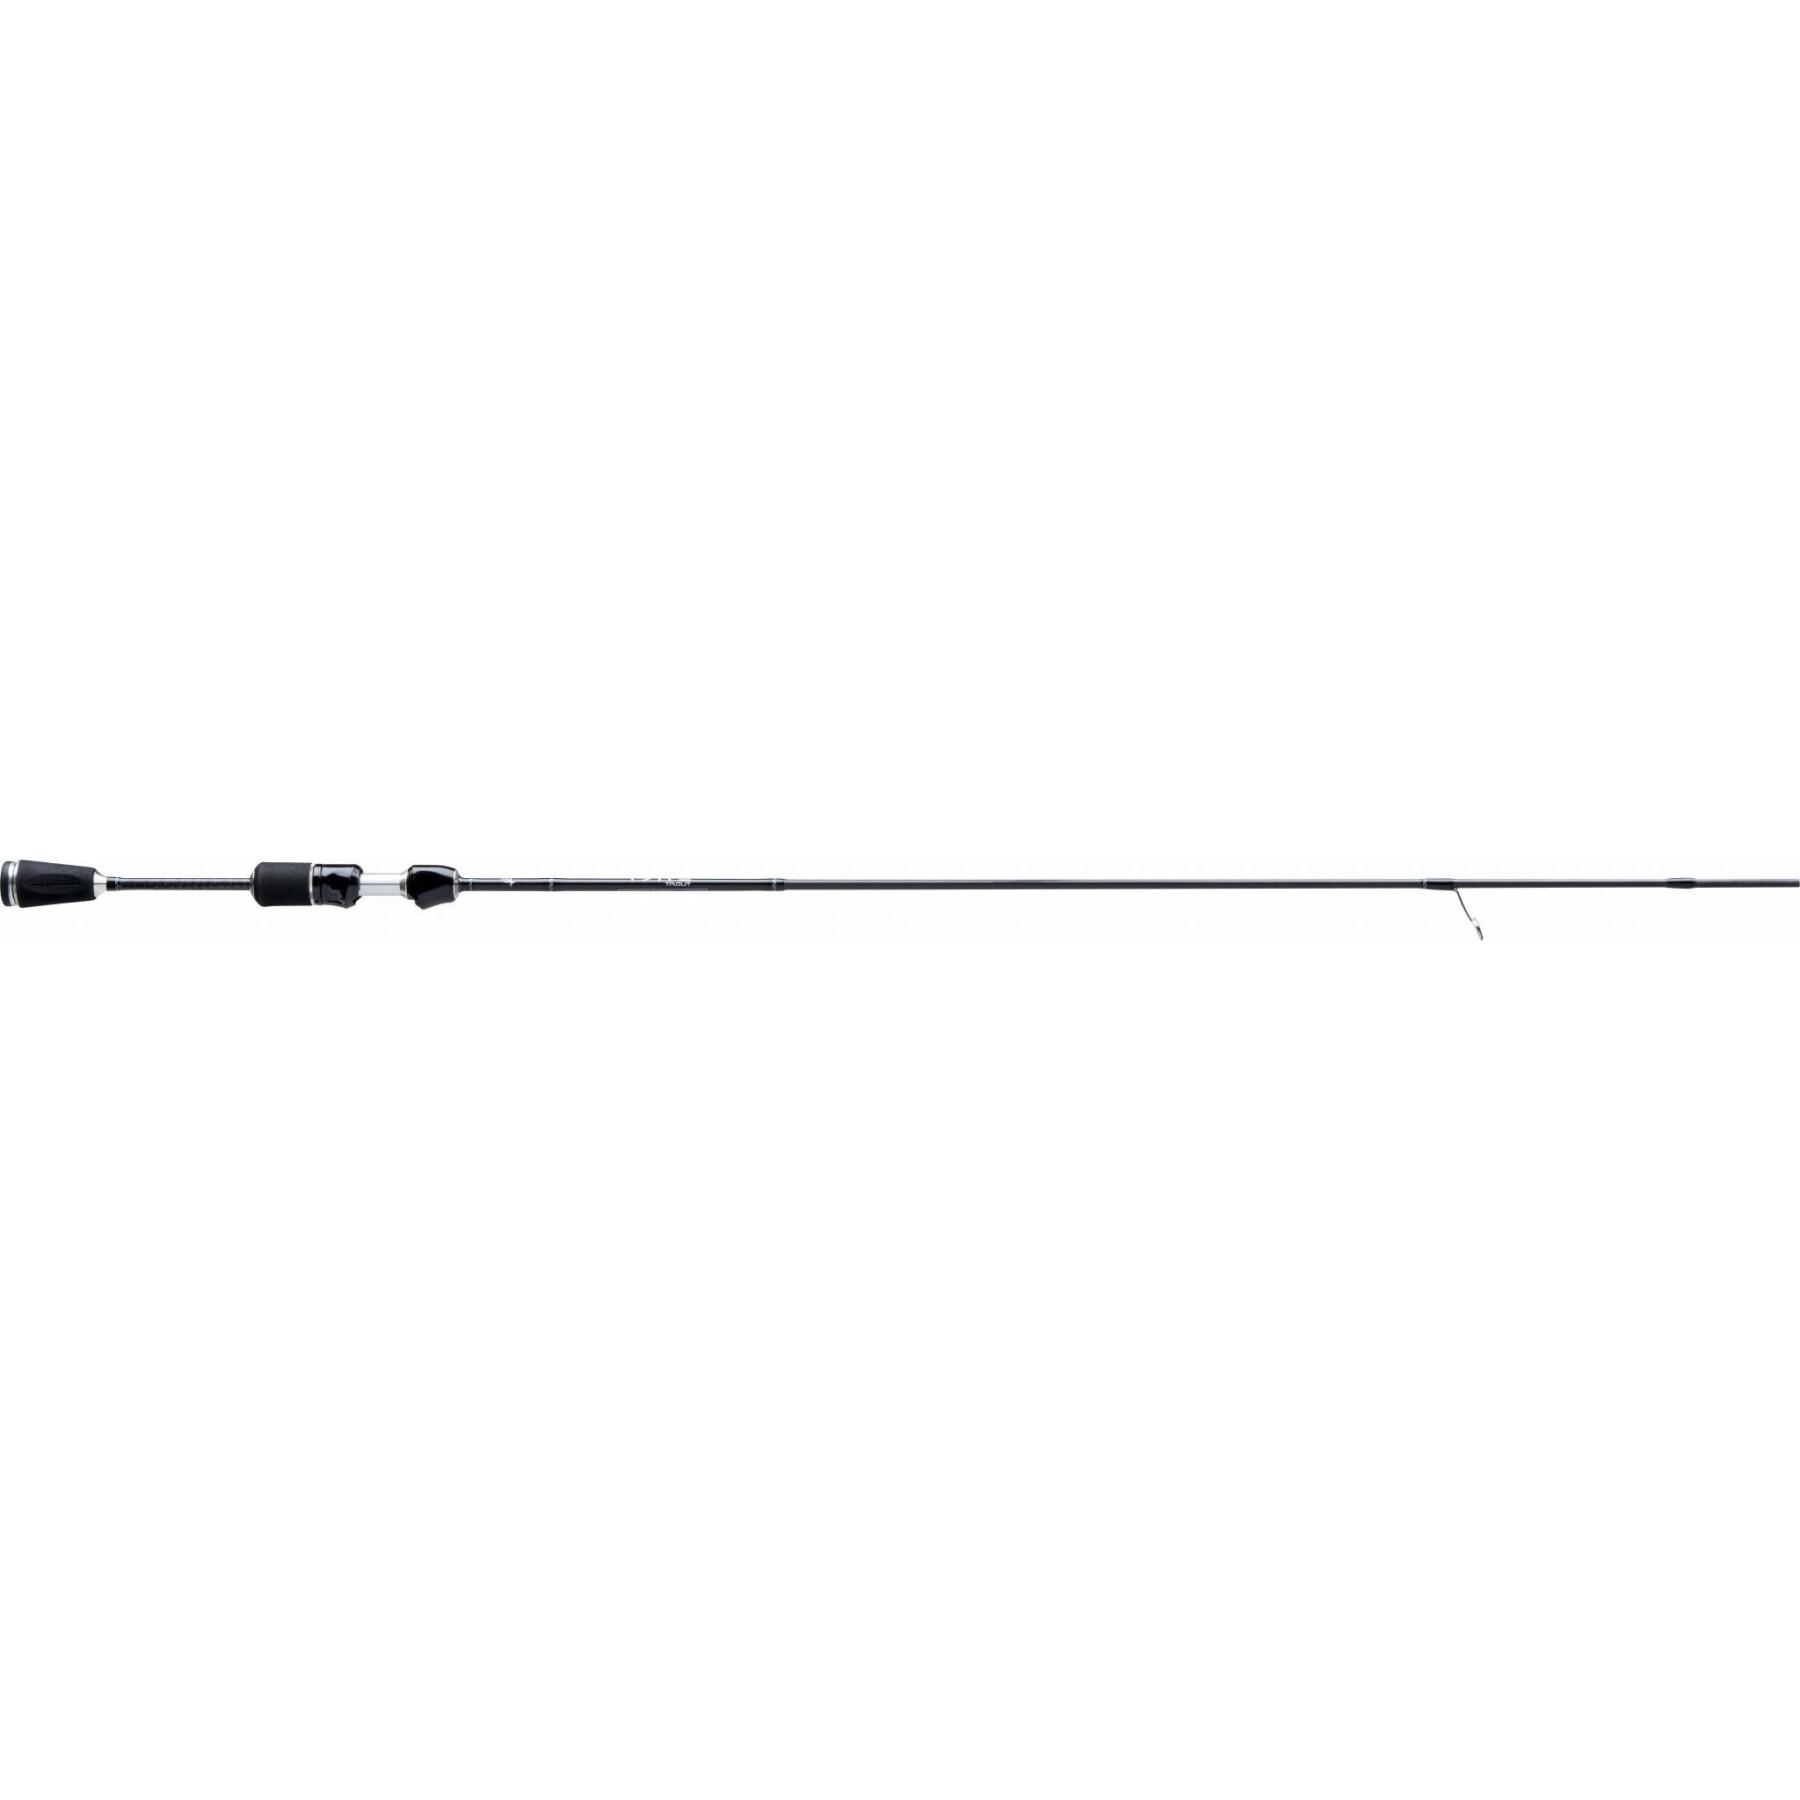 Canne 13 Fishing Fate Trout sp 1,92m 0,5-3,5g